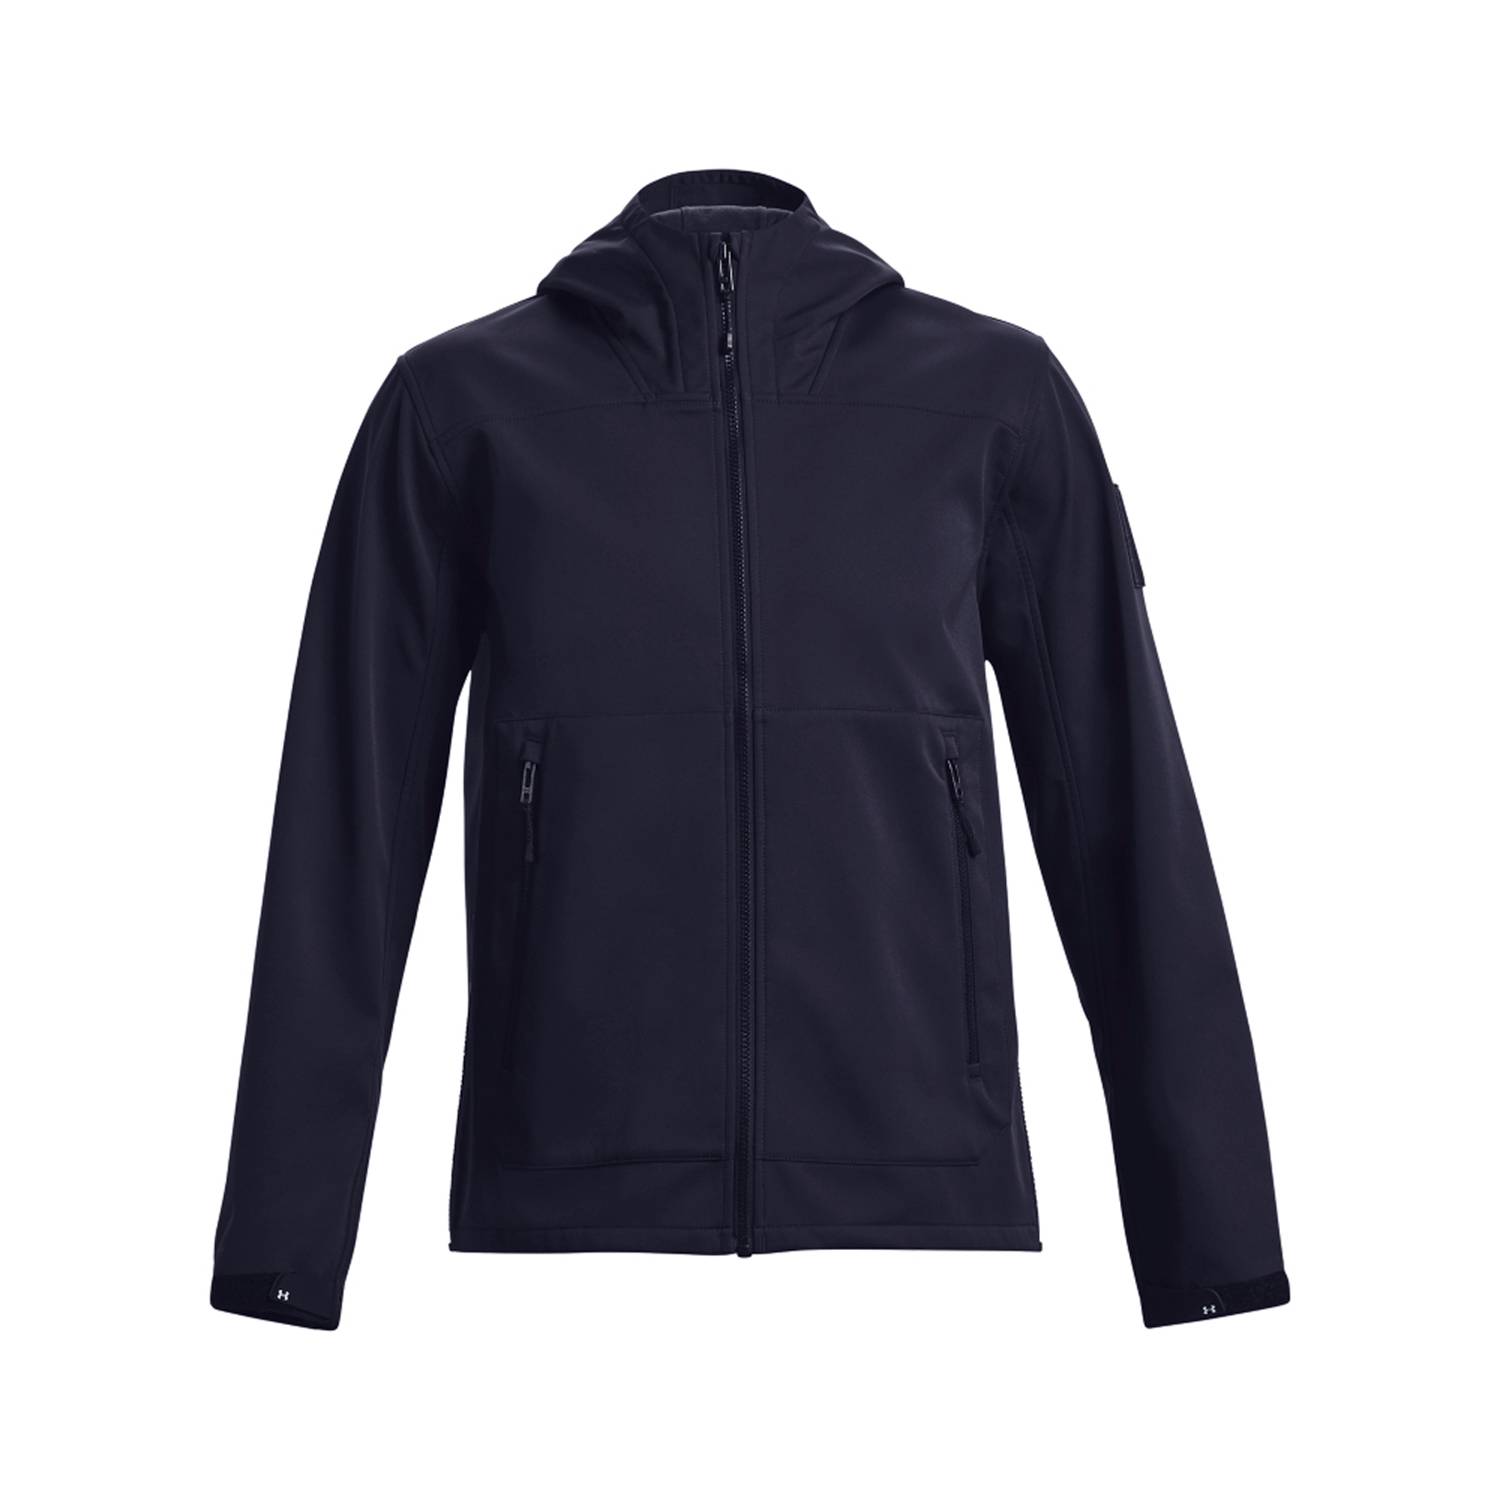 UNDER ARMOUR WOMEN'S TAC SOFTSHELL JACKET